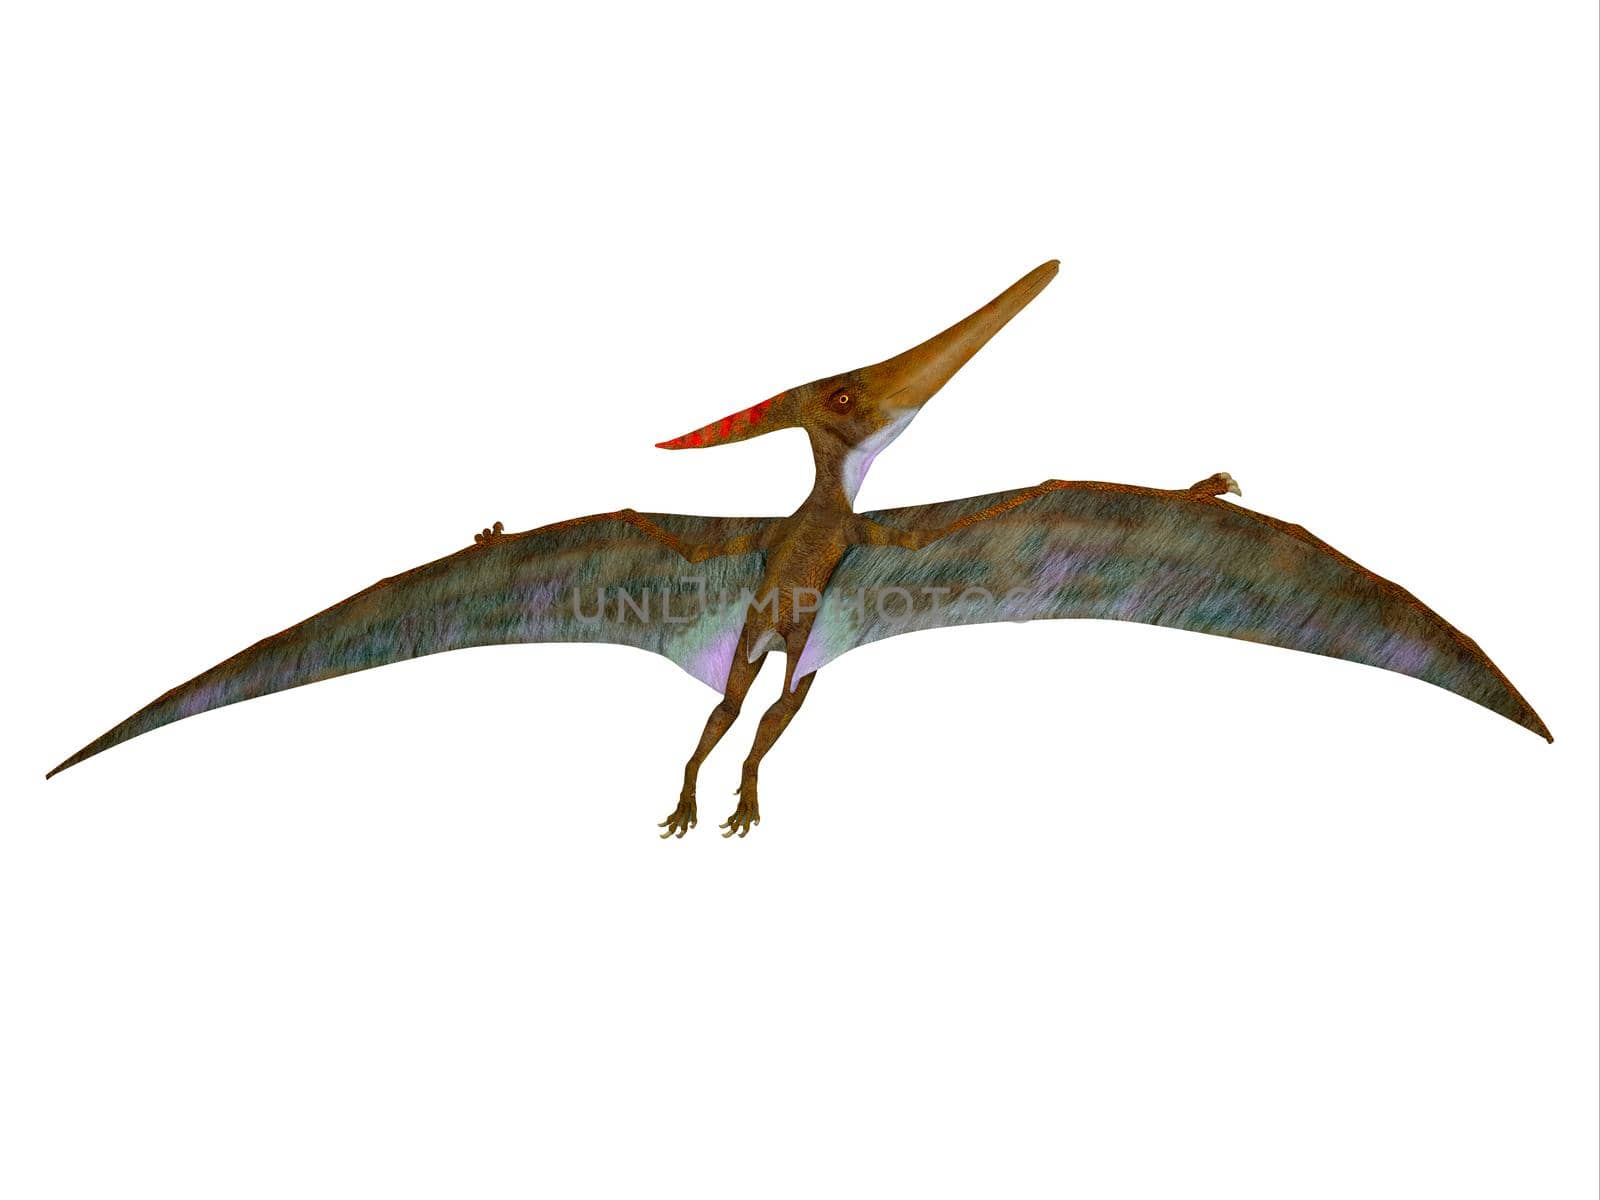 Pteranodon was a carnivorous Pterosaur reptile that flew in North America during the Cretaceous Period.